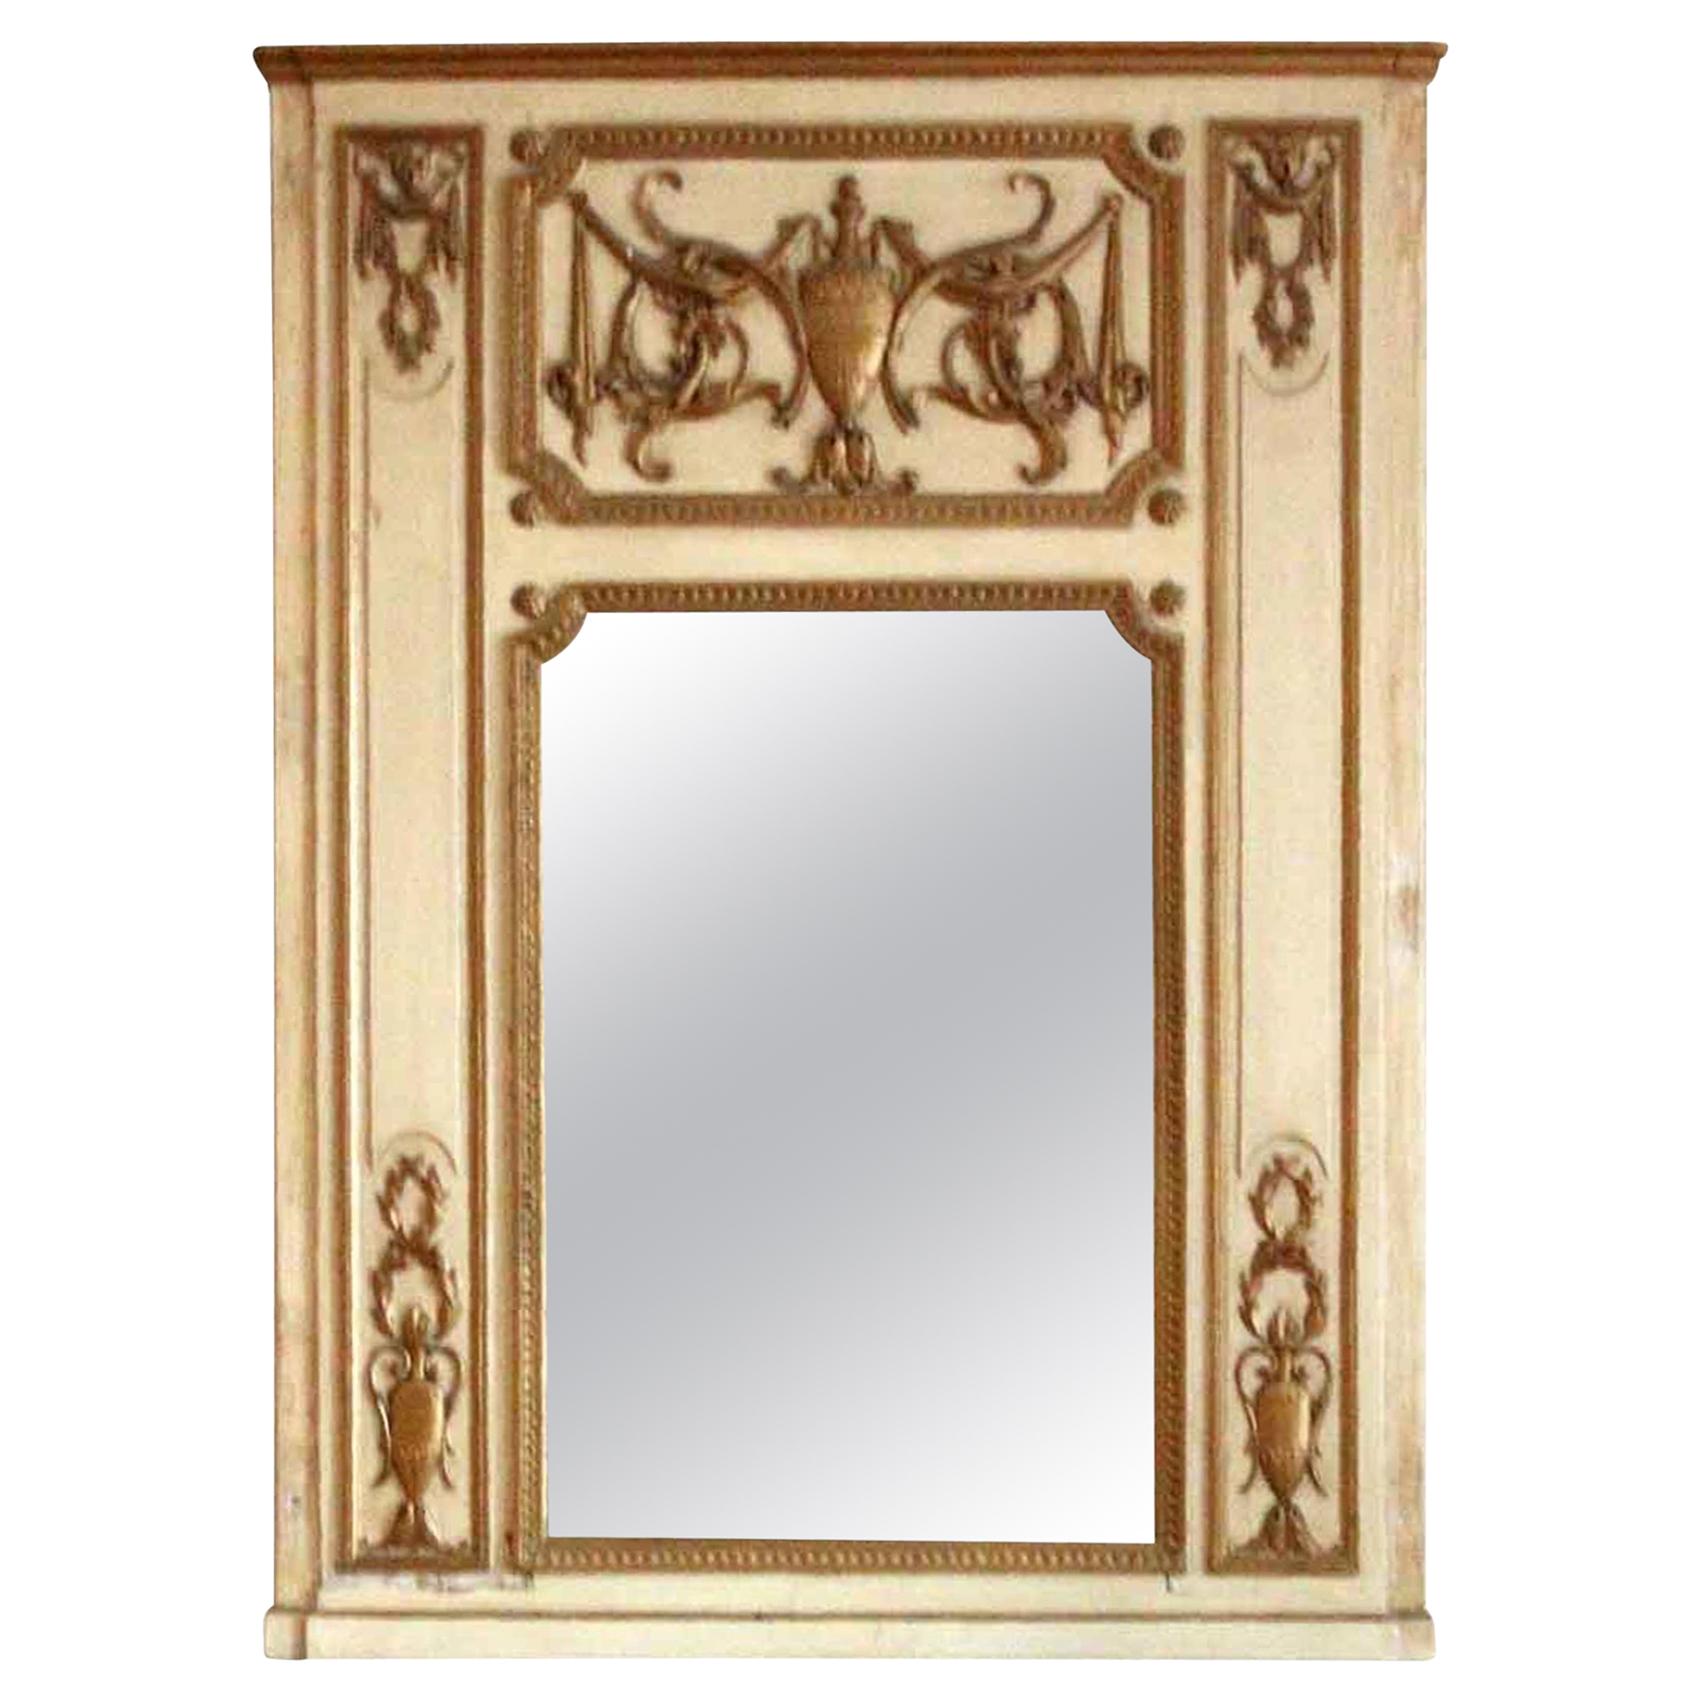 1931 NYC Waldorf Astoria Hotel Wood Tan & Gold Over Mantel Mirror from Room 765 